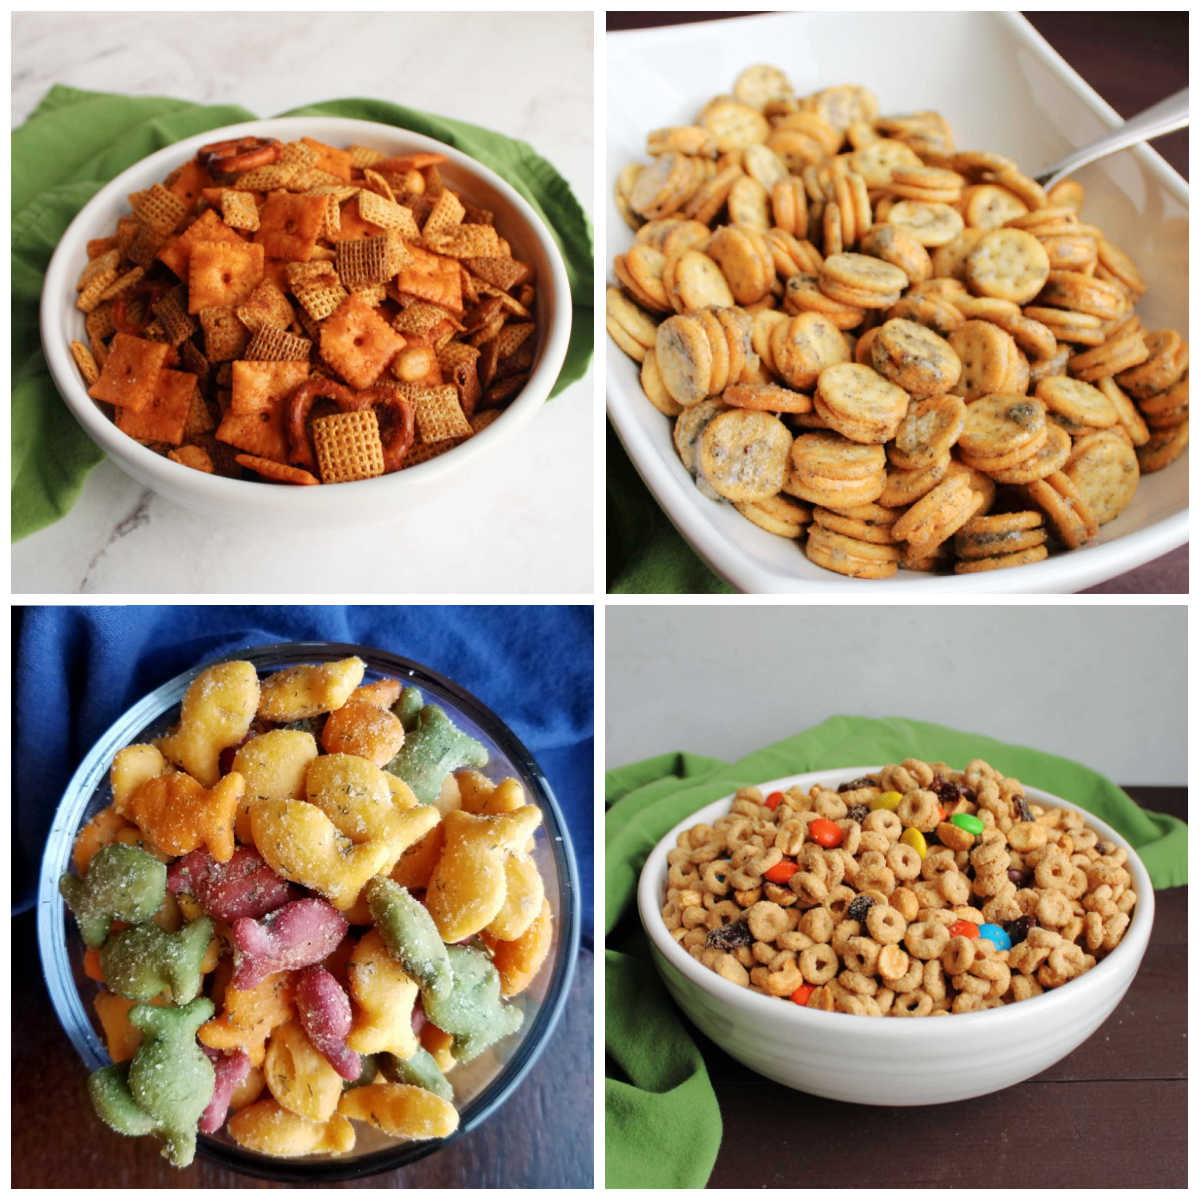 Collage of images of snack mixes including chex mix, seasoned crackers, and a trail mix.